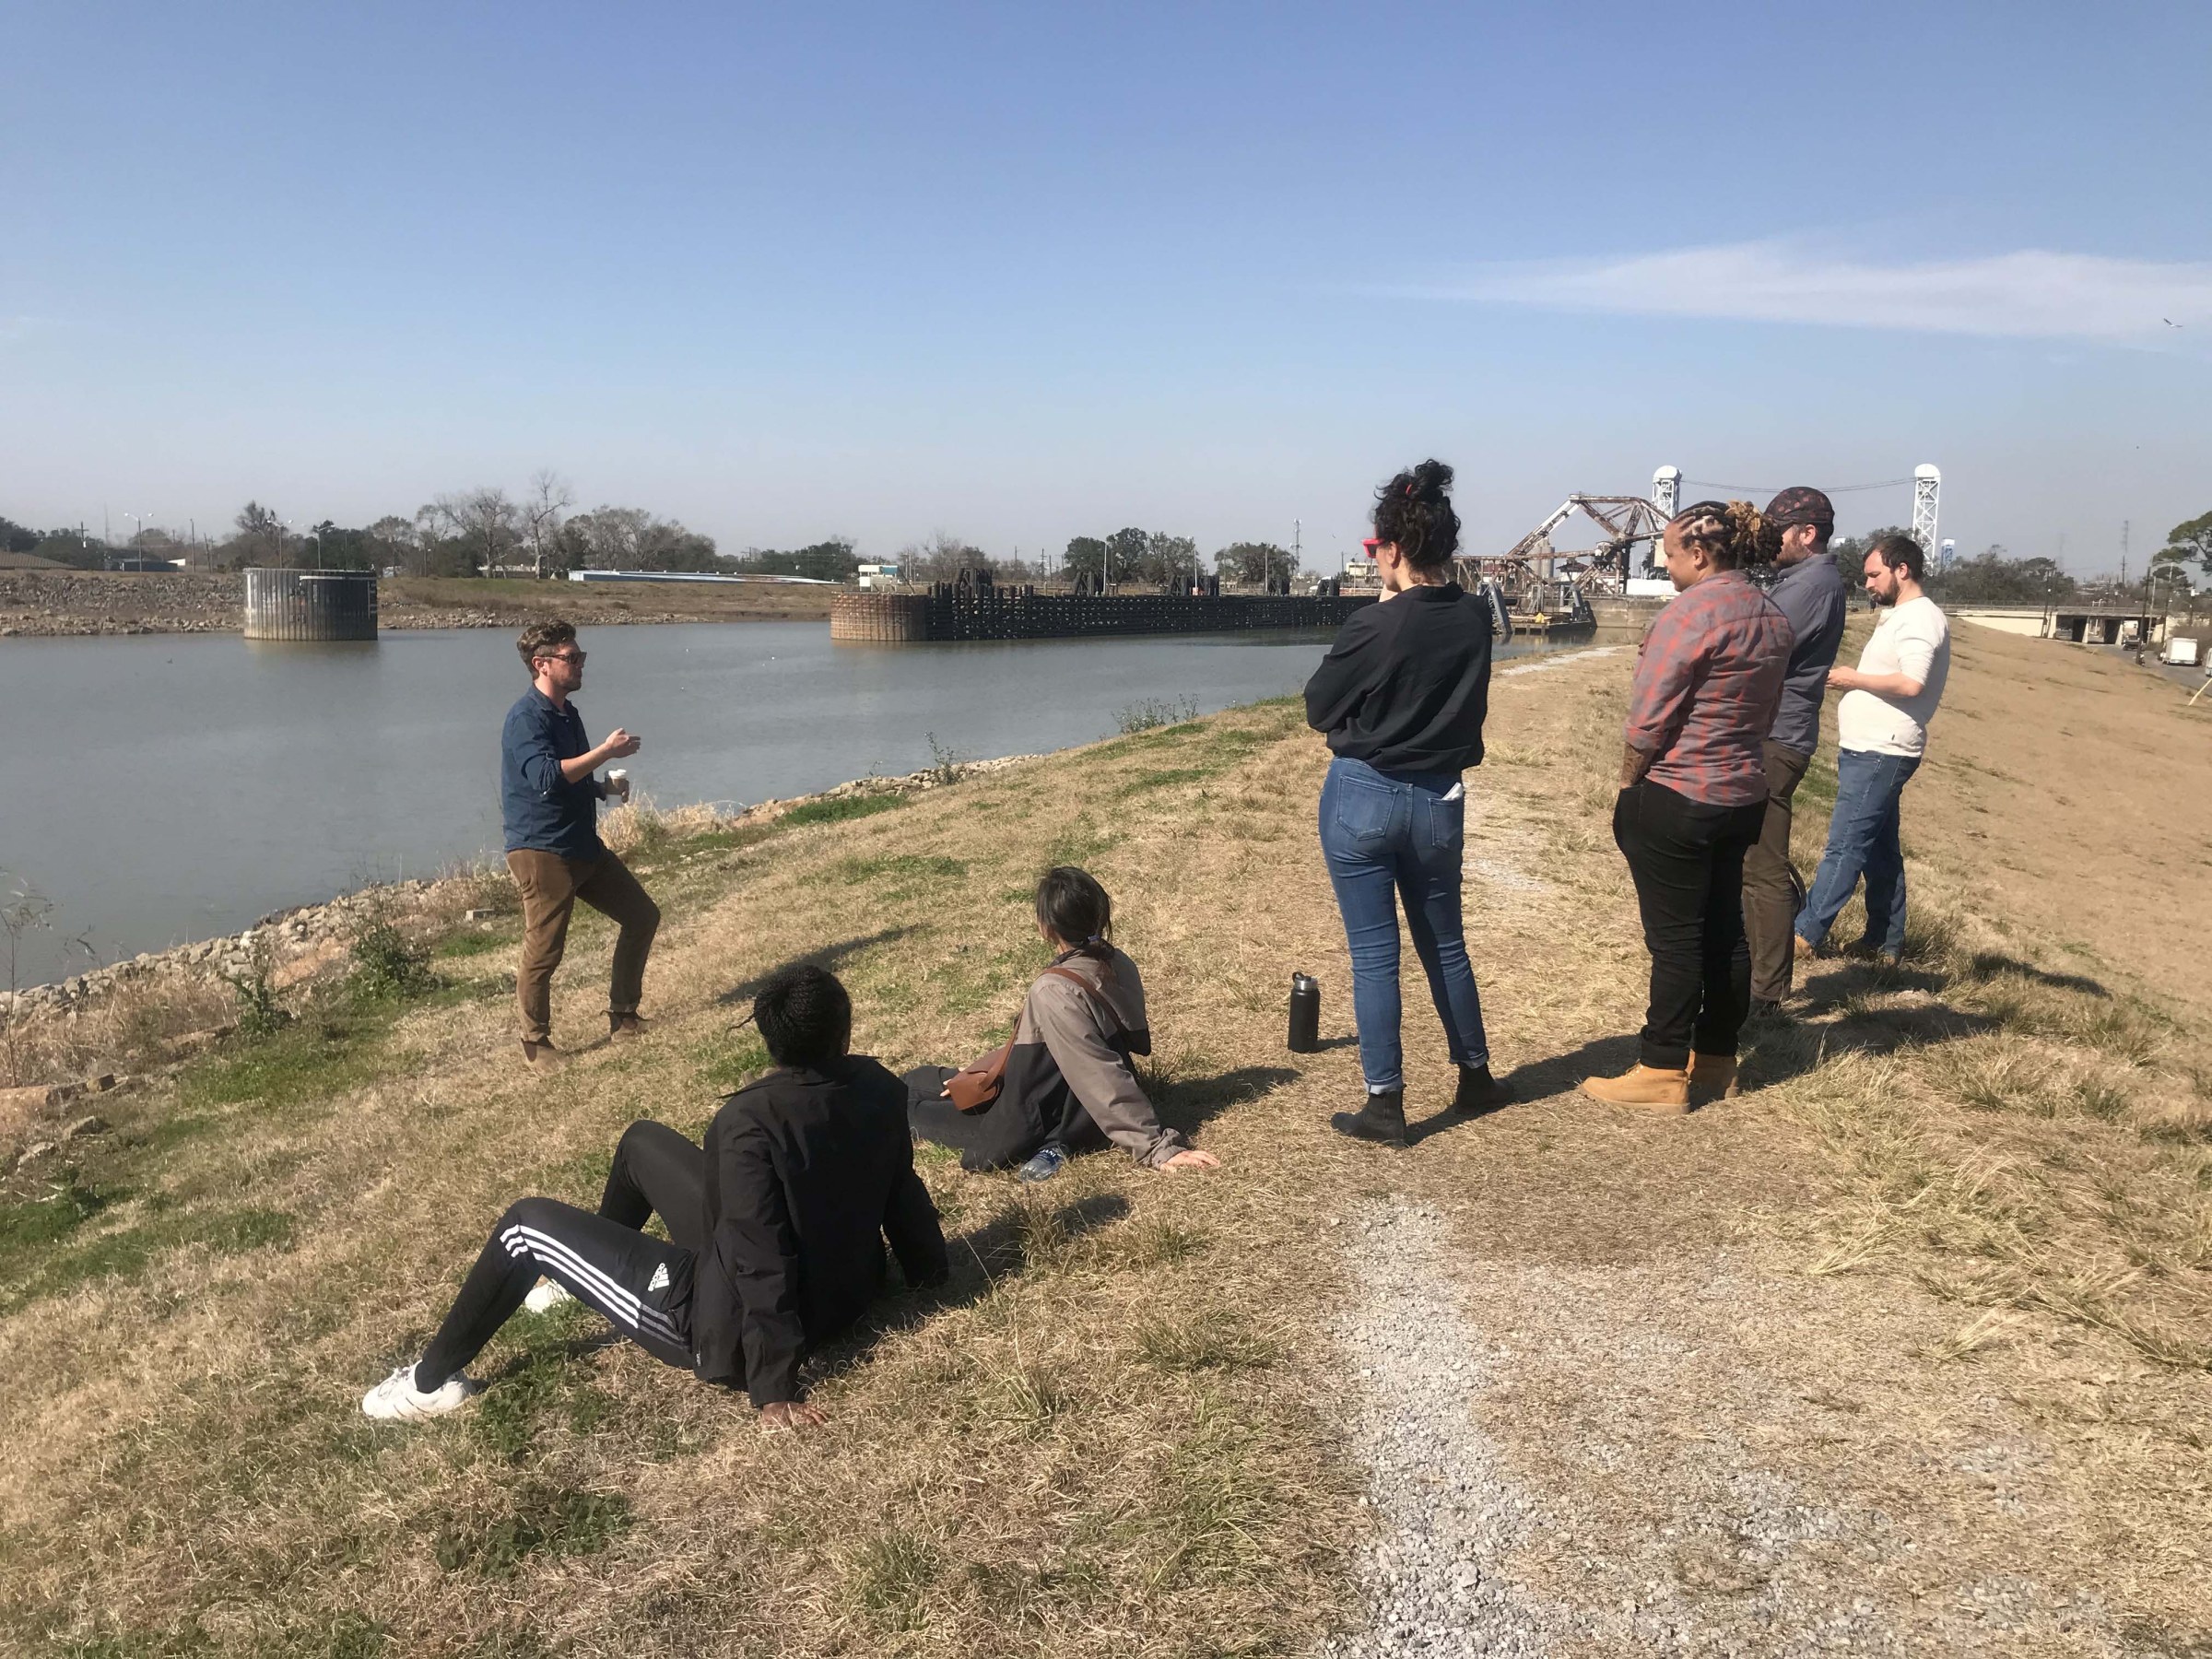 A small group of people sit and stand while talking on an earthen levee next to an industrial canal with an bridge in the background.